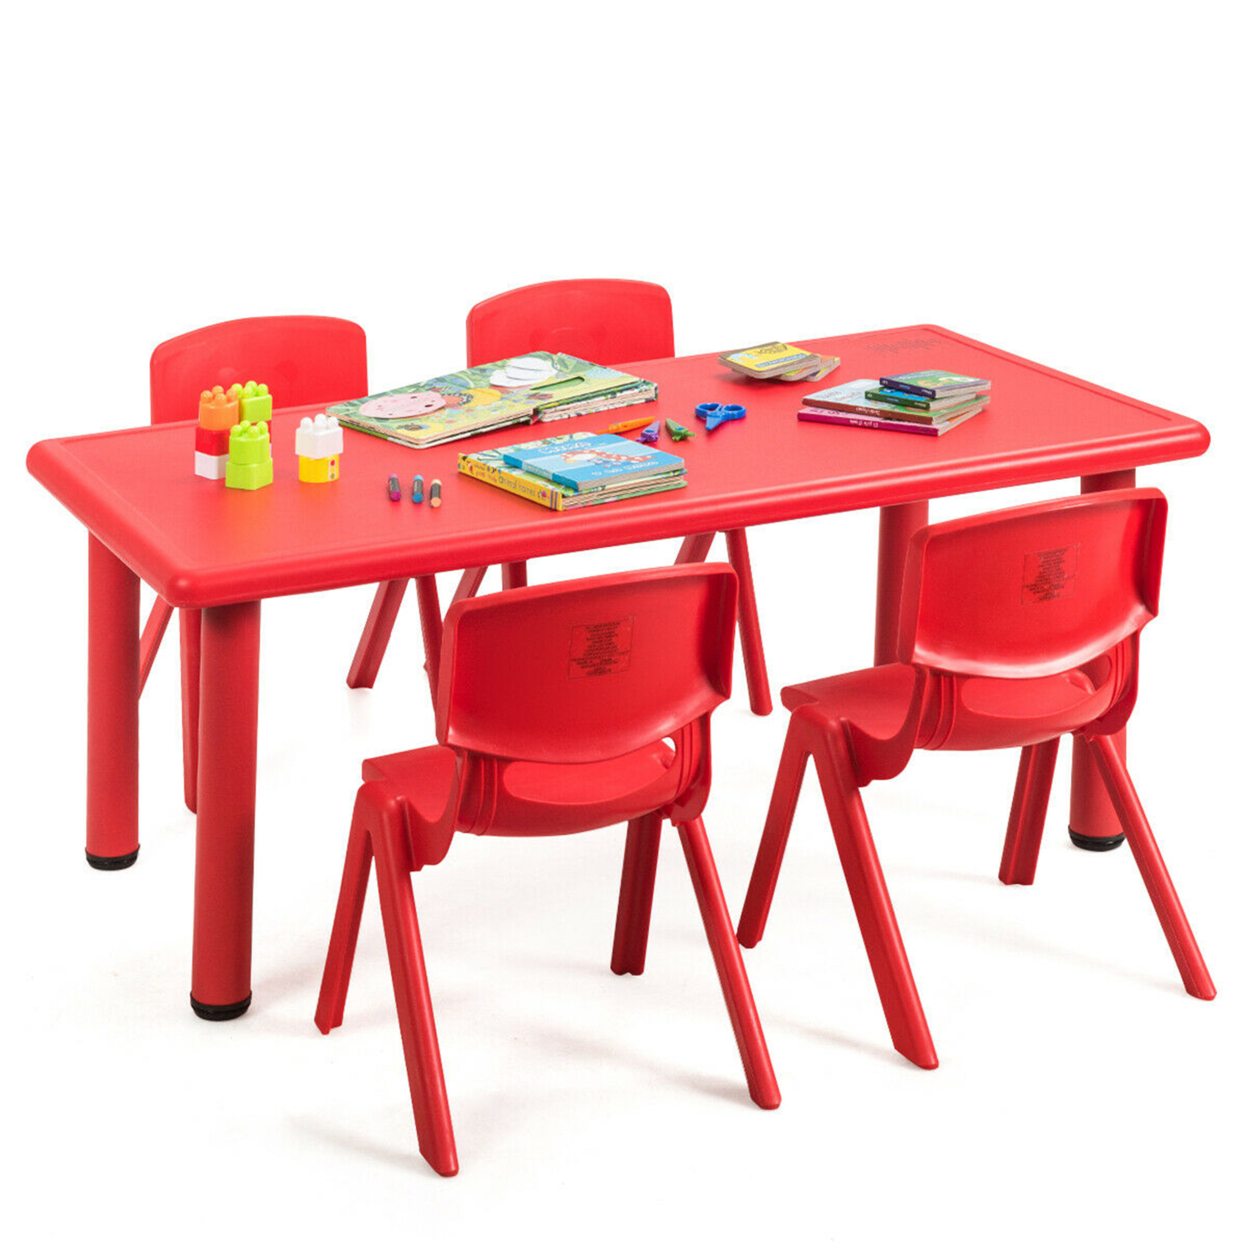 Kids Plastic Table And Stackable Chairs Set Indoor/Outdoor Home Classroom Red